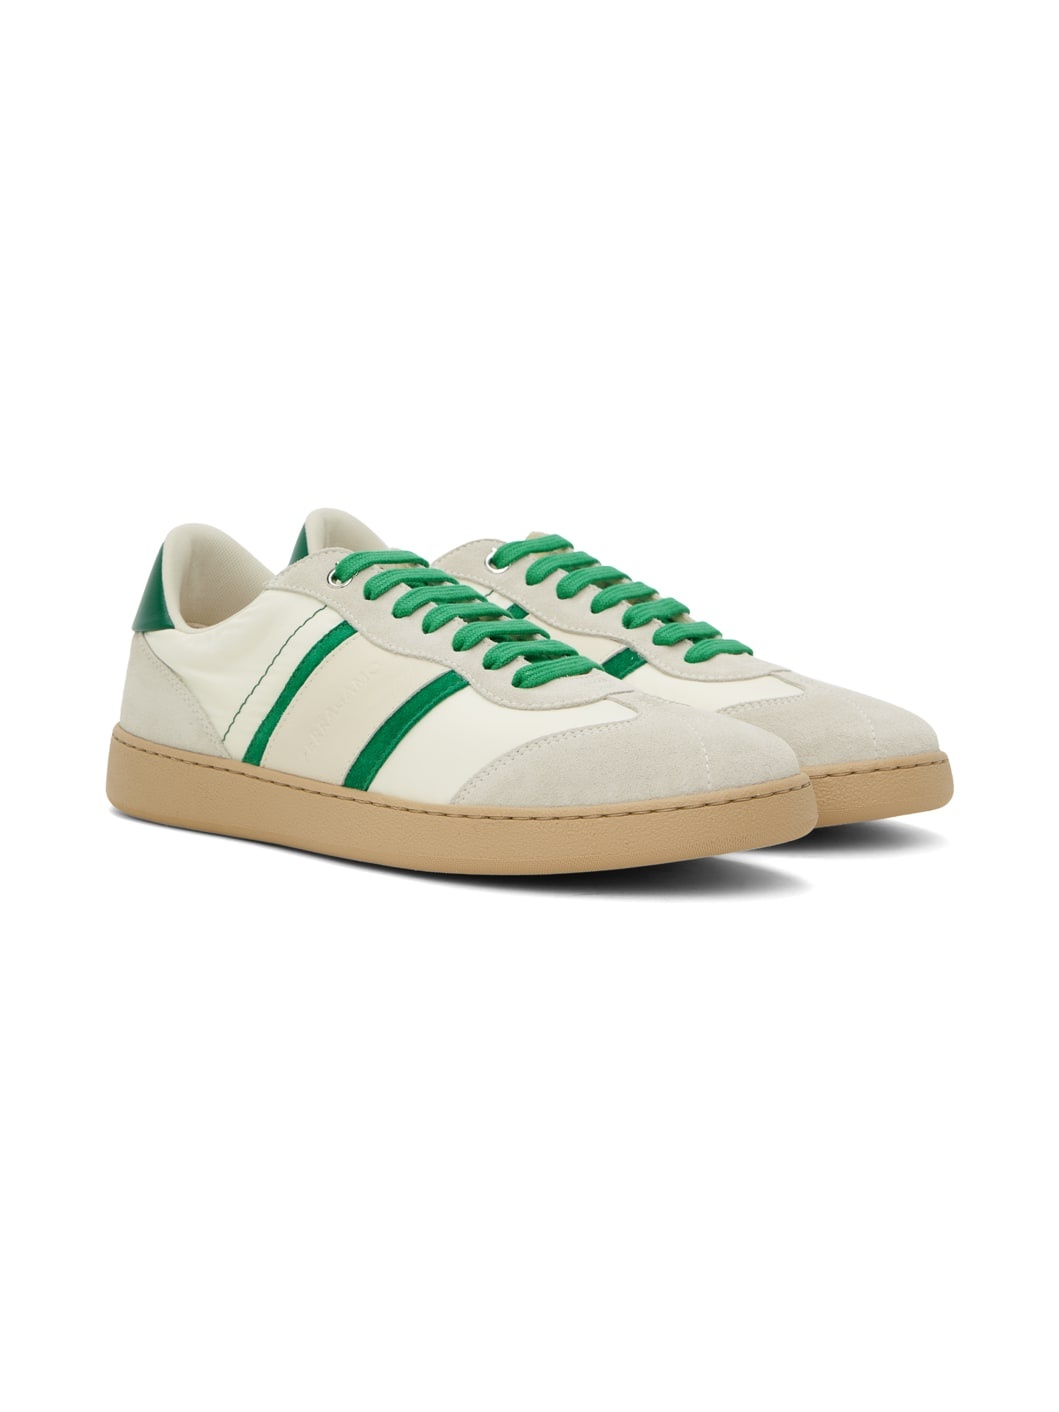 Off-White & Green Signature Low Sneakers - 4